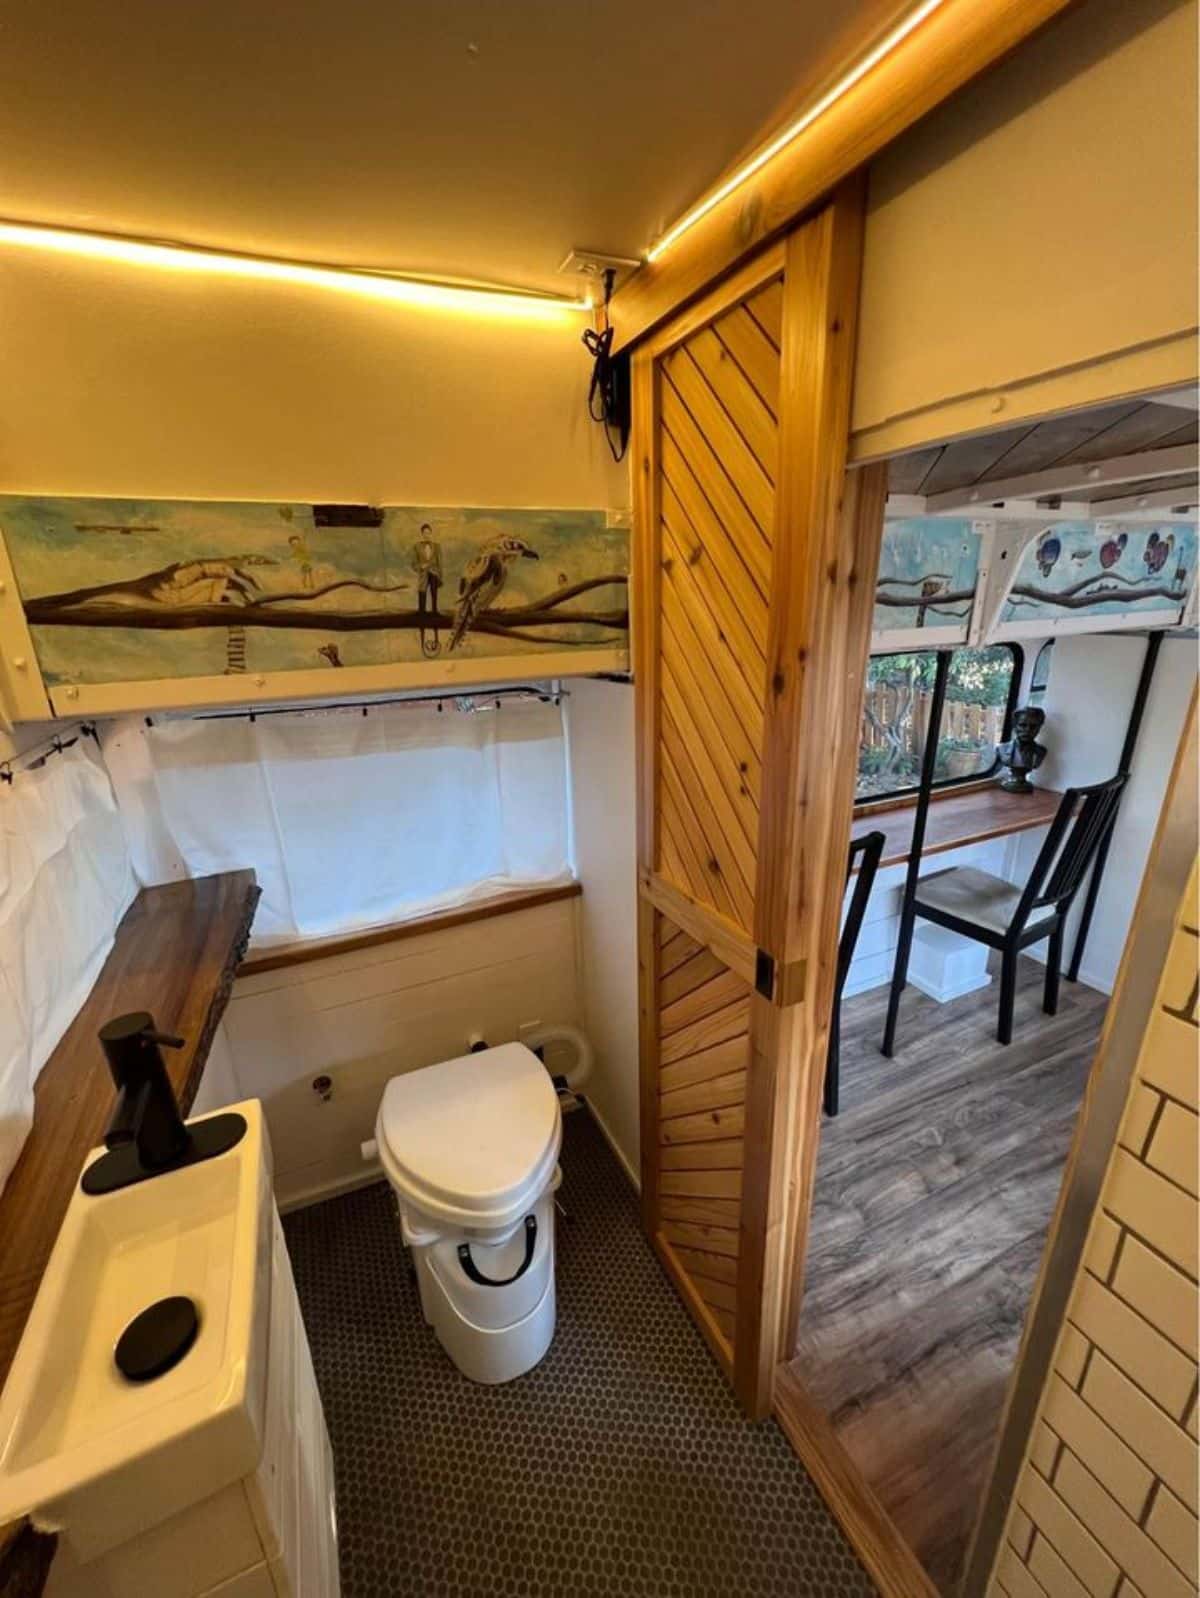 bathroom of AirBnb tiny home has all the standard fittings and composting toilet